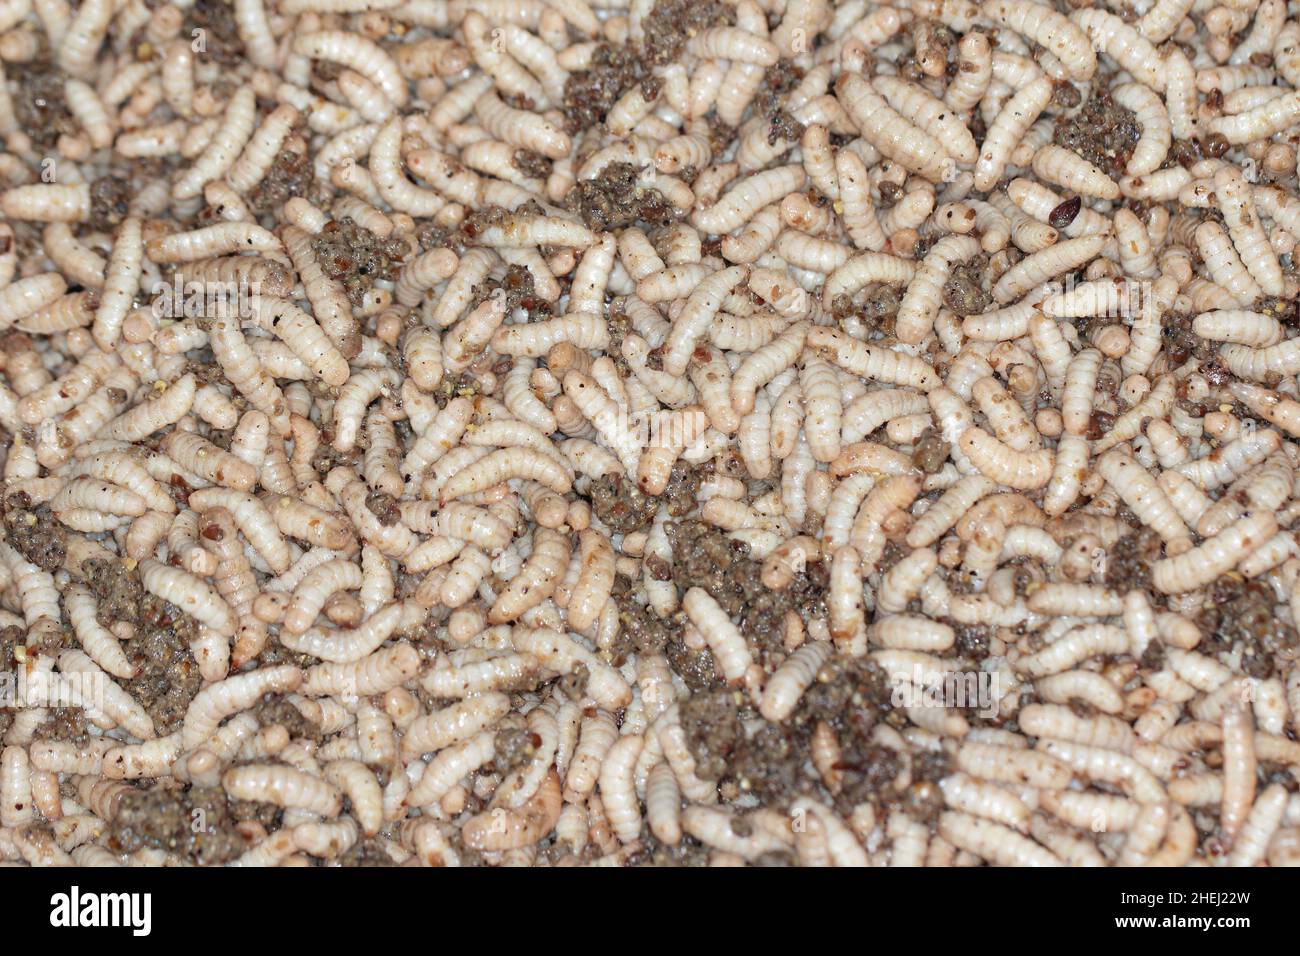 Hermetia illucens - Black soldier fly larvae in feeding plate with organic waste, Insect farm. Stock Photo